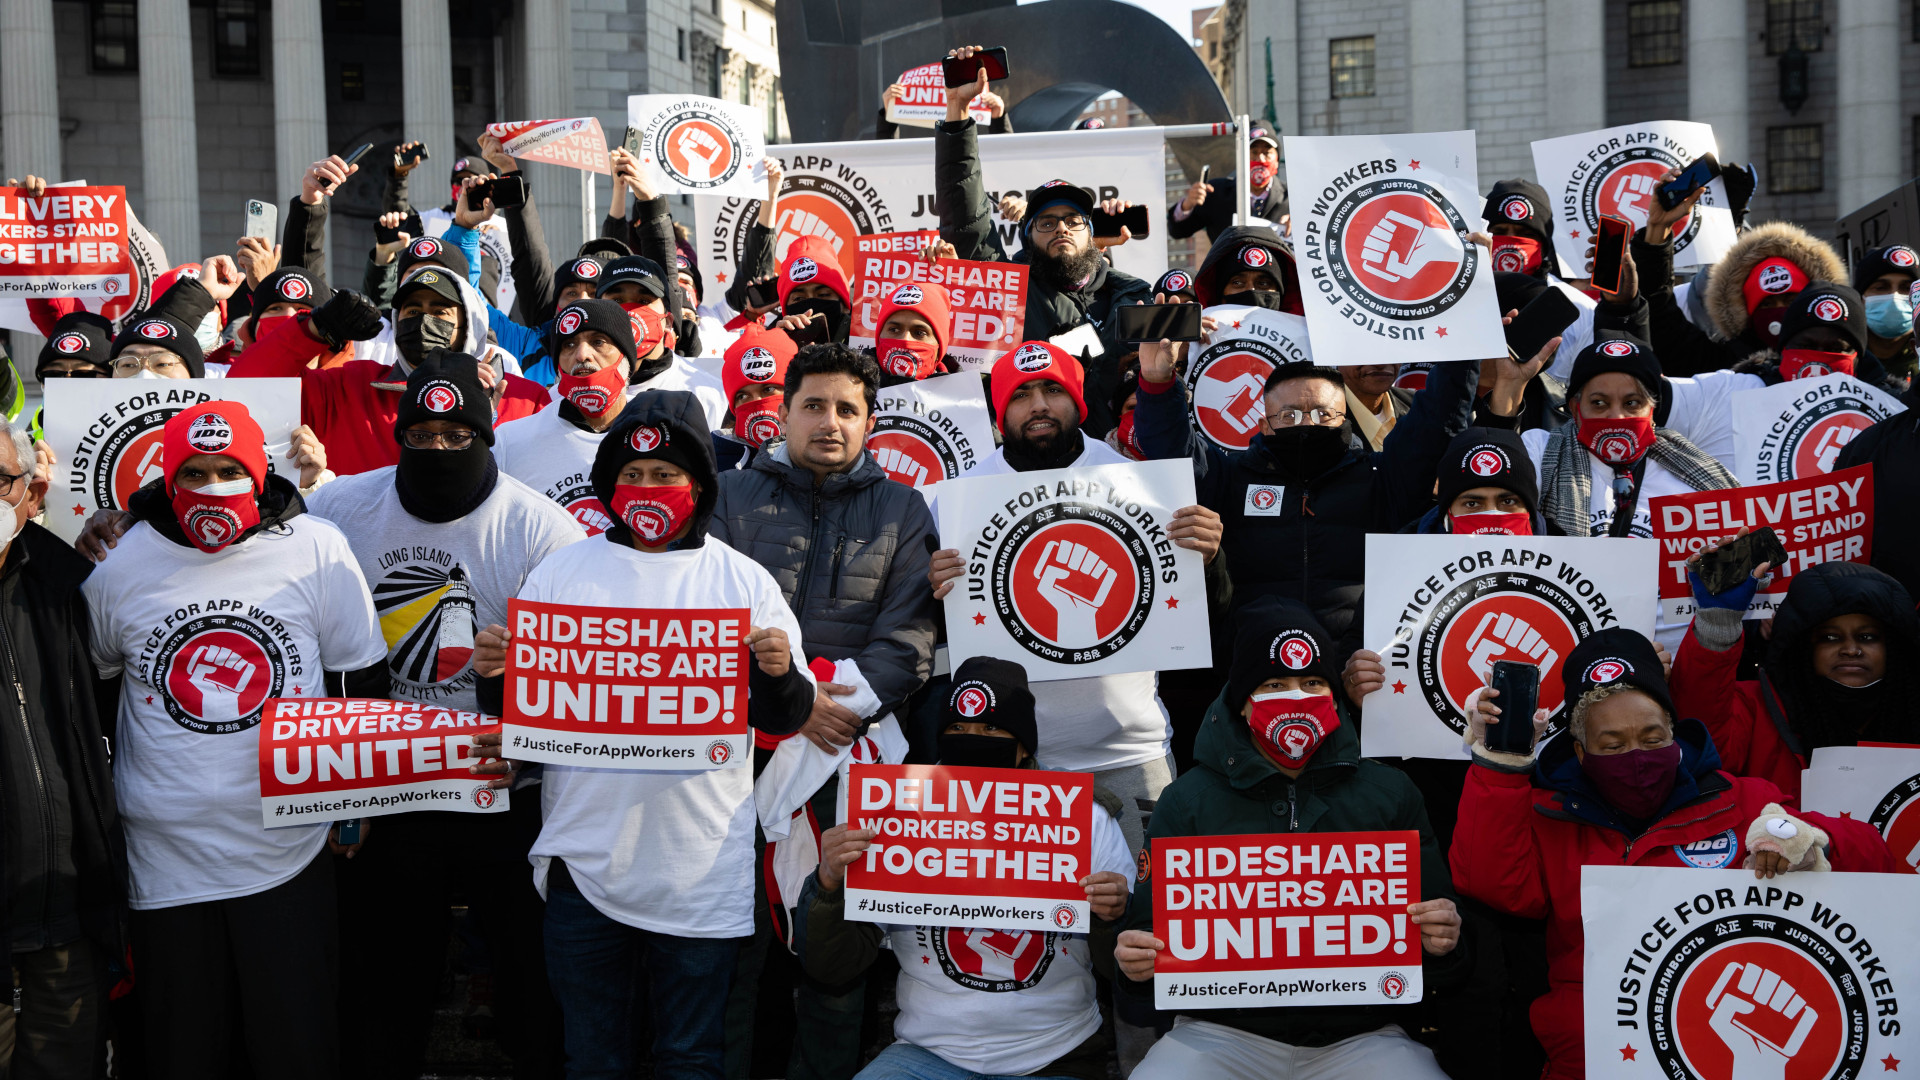 A new coalition called Justice for App Workers is banding together New York City gig workers in pursuit of union rights